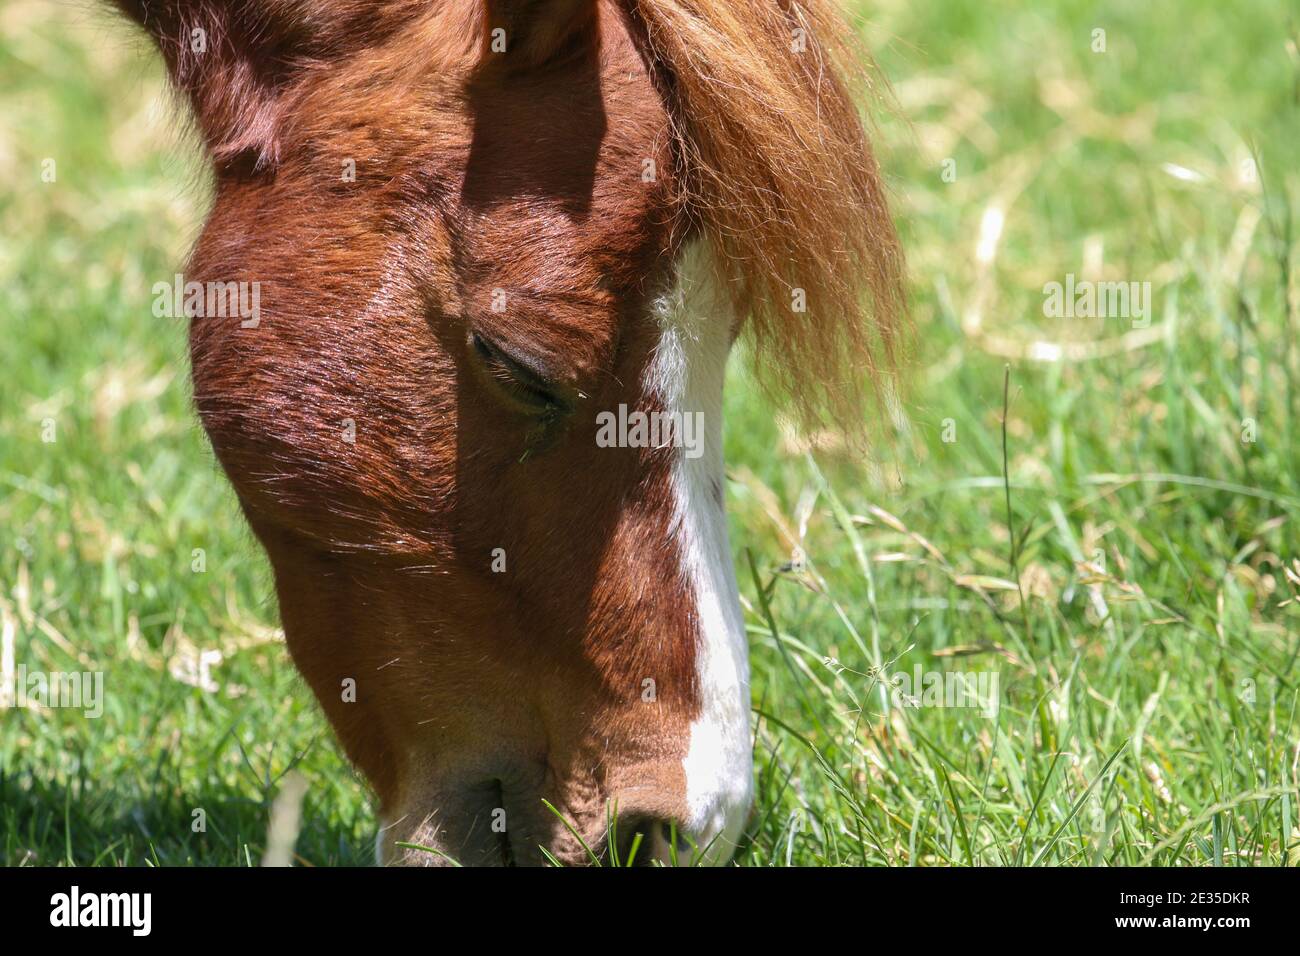 Horse Eating Grass Stock Photo